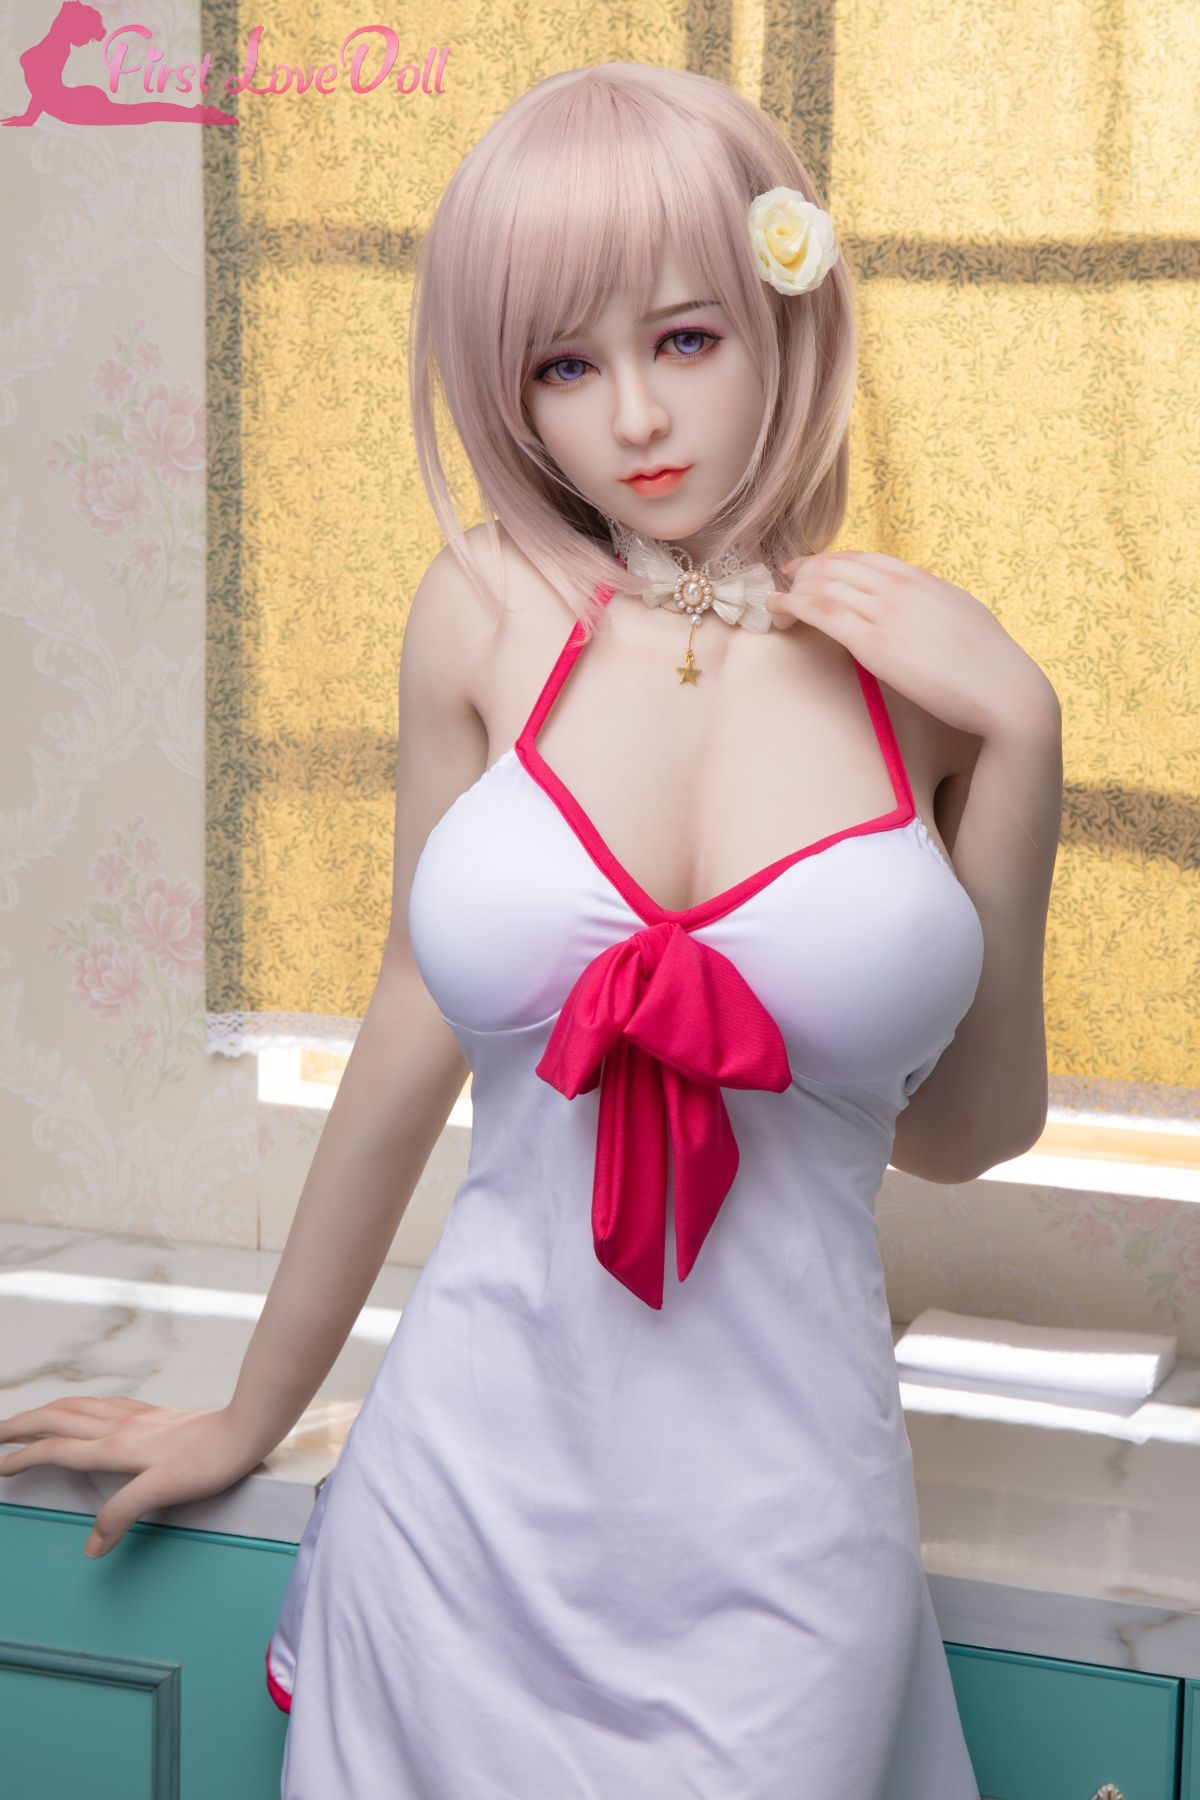 JX Doll | Emria- 4ft 11/150cm Realistic Full Silicone Sex Doll-First Love Doll